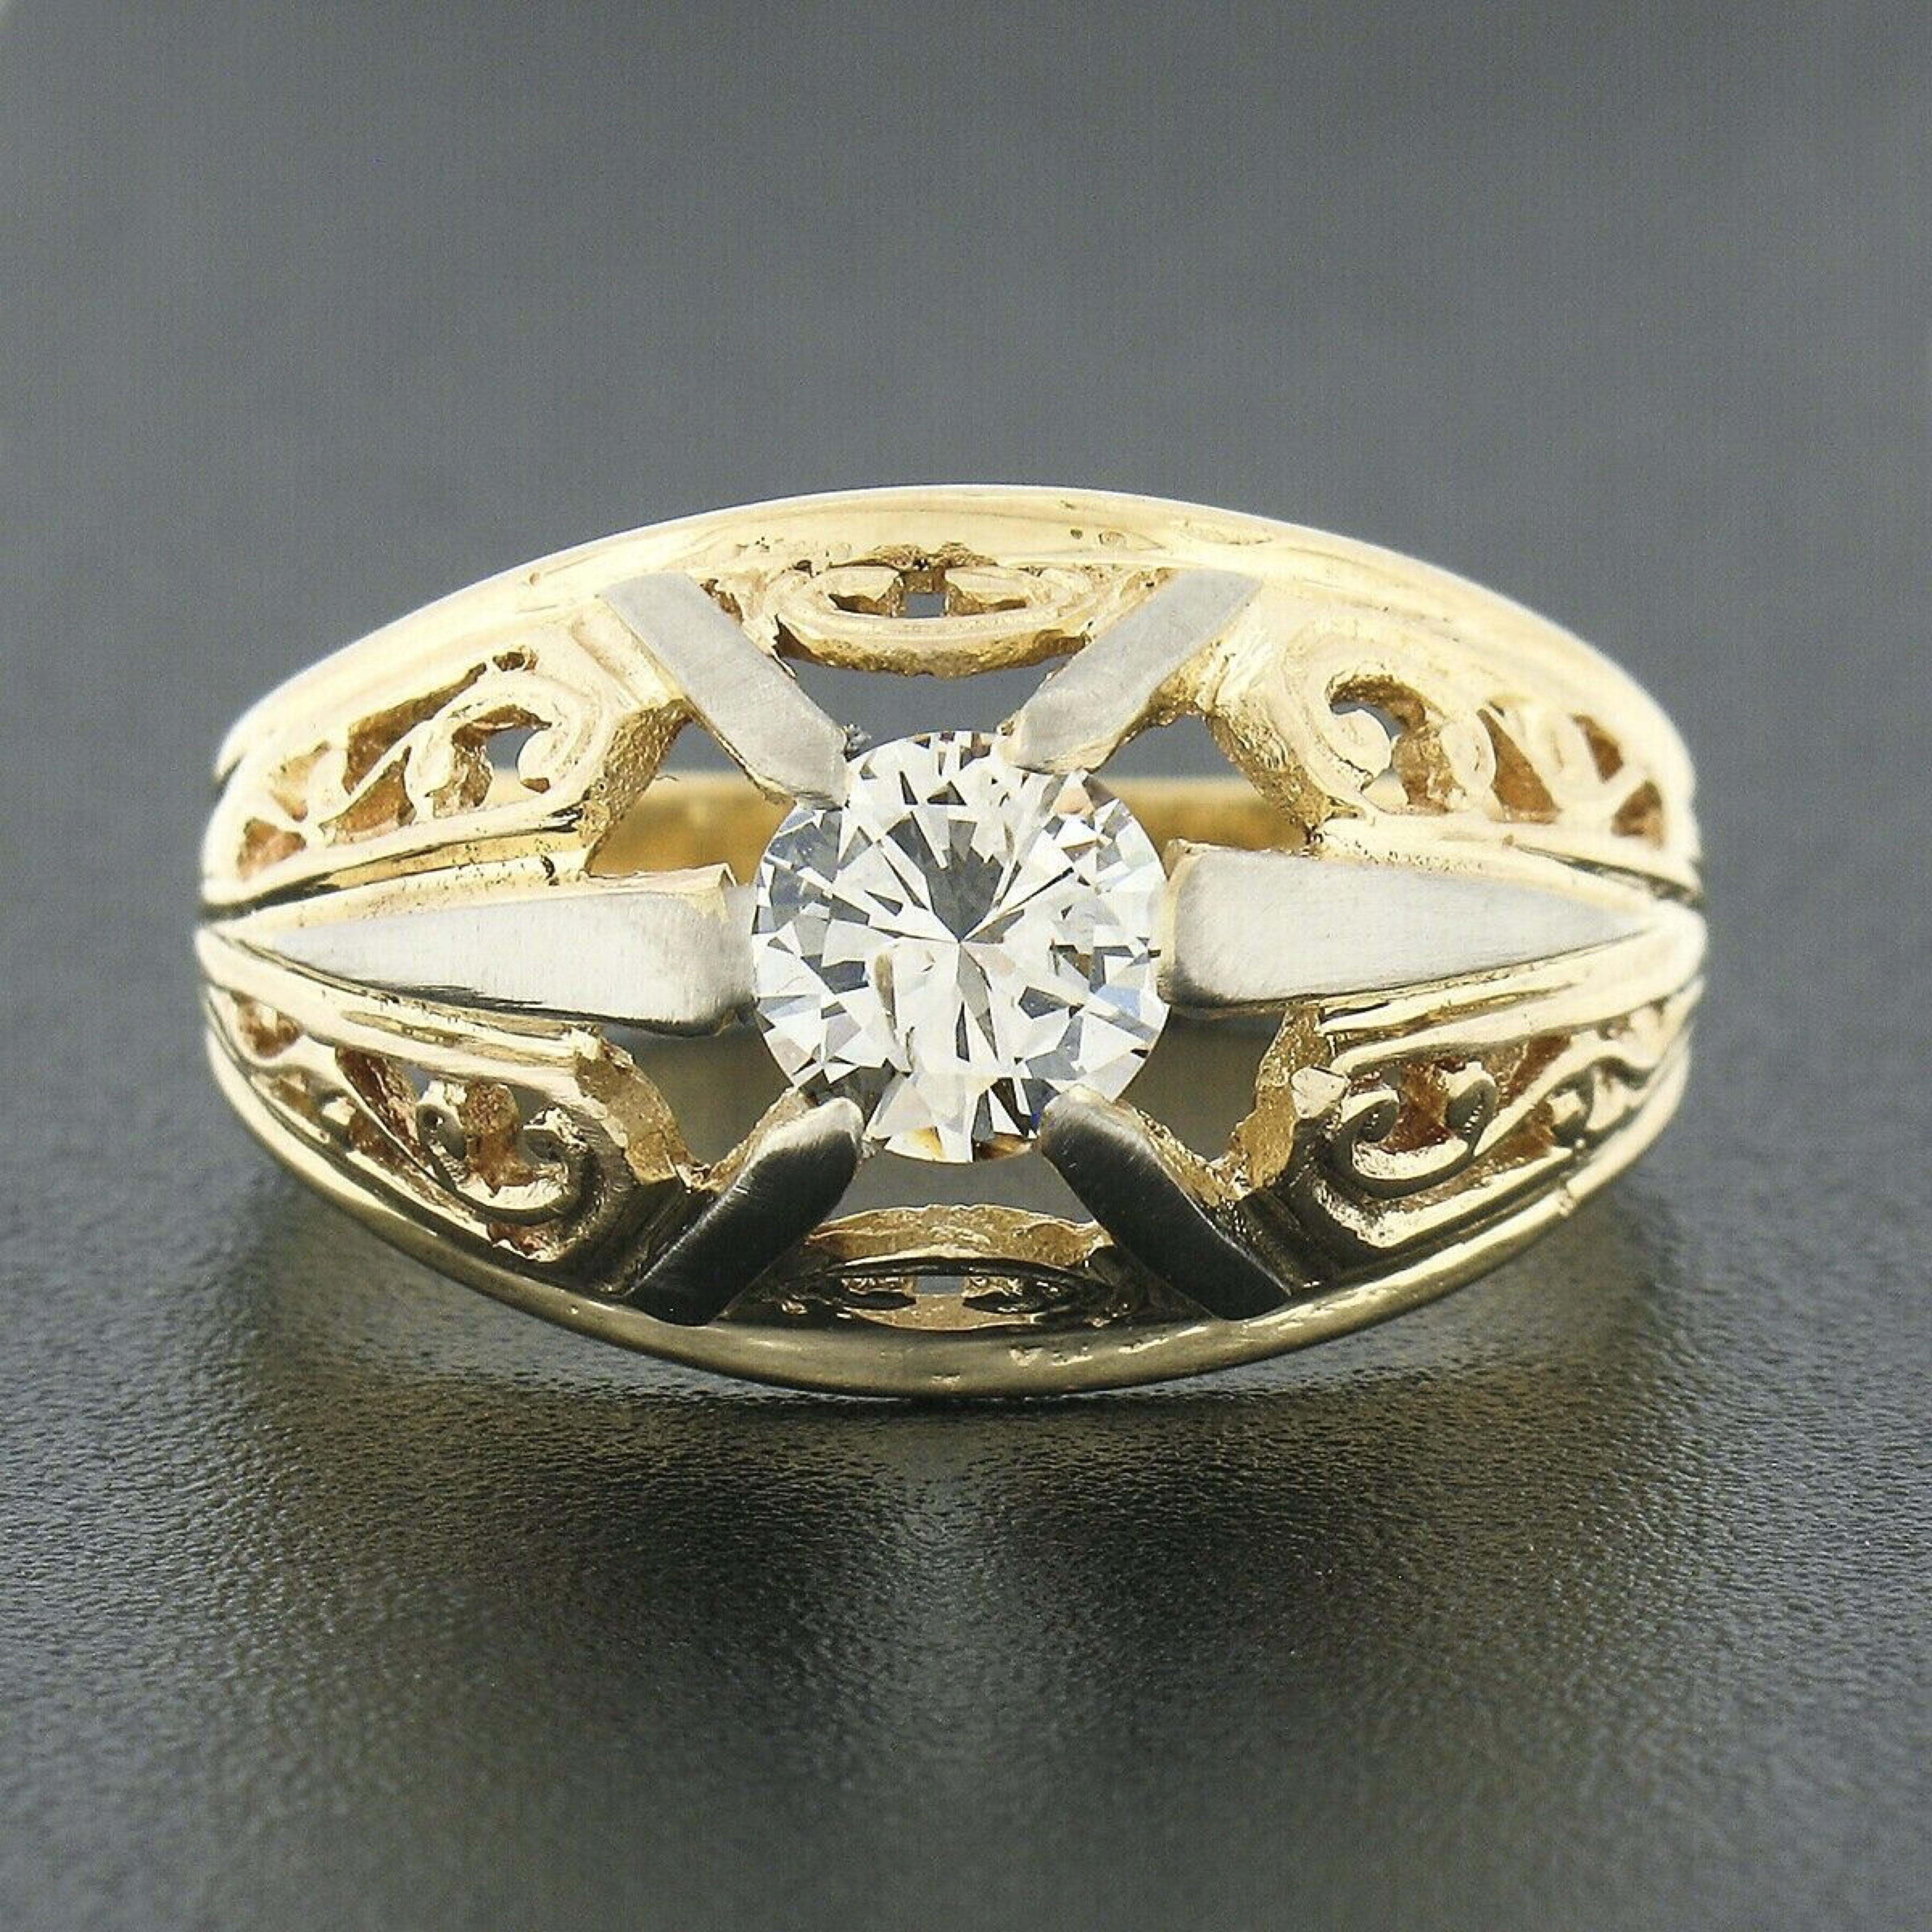 This unique men's vintage ring is crafted in solid 18k yellow gold with white gold prongs that feature a stunning old transitional cut diamond at the domed open center. The fine diamond solitaire displays magnificent amount of sparkle with fiery